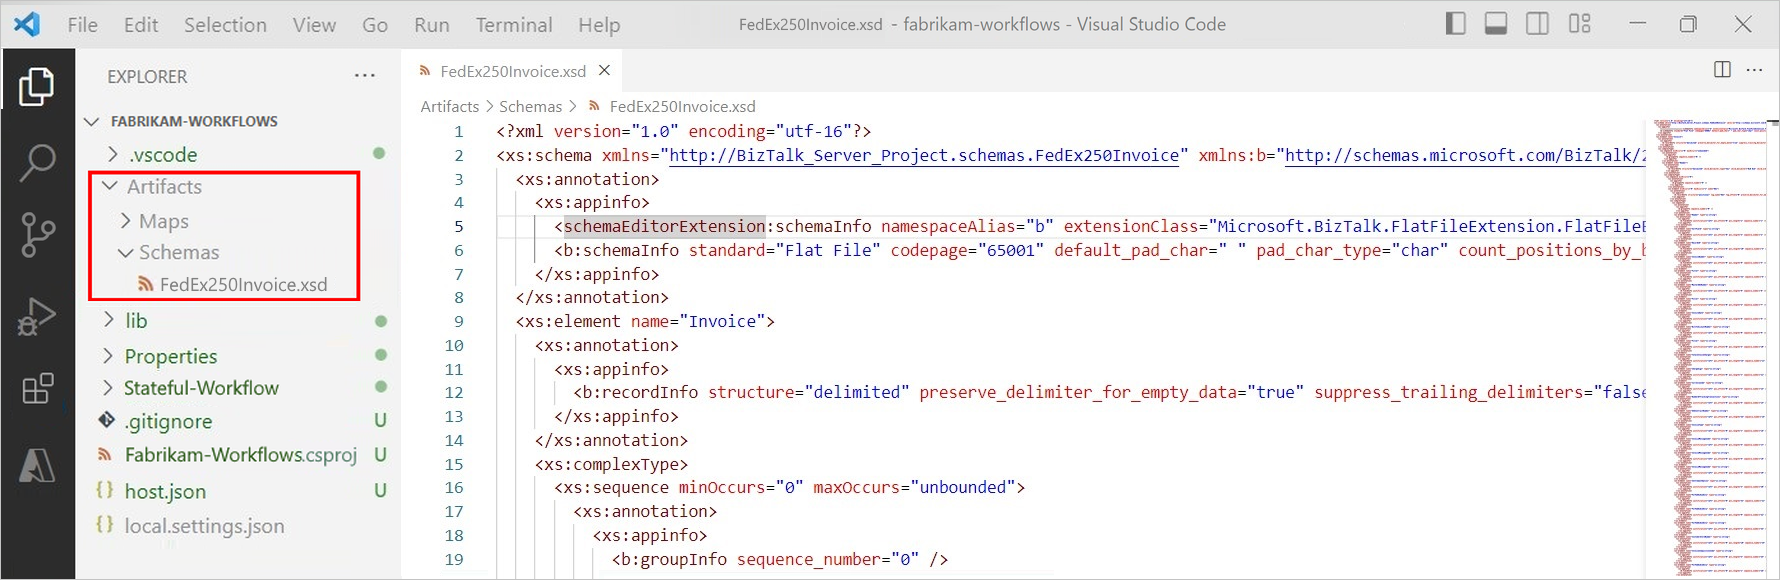 Screenshot shows Visual Studio Code project hierarchy with Artifacts and Schemas folders expanded.